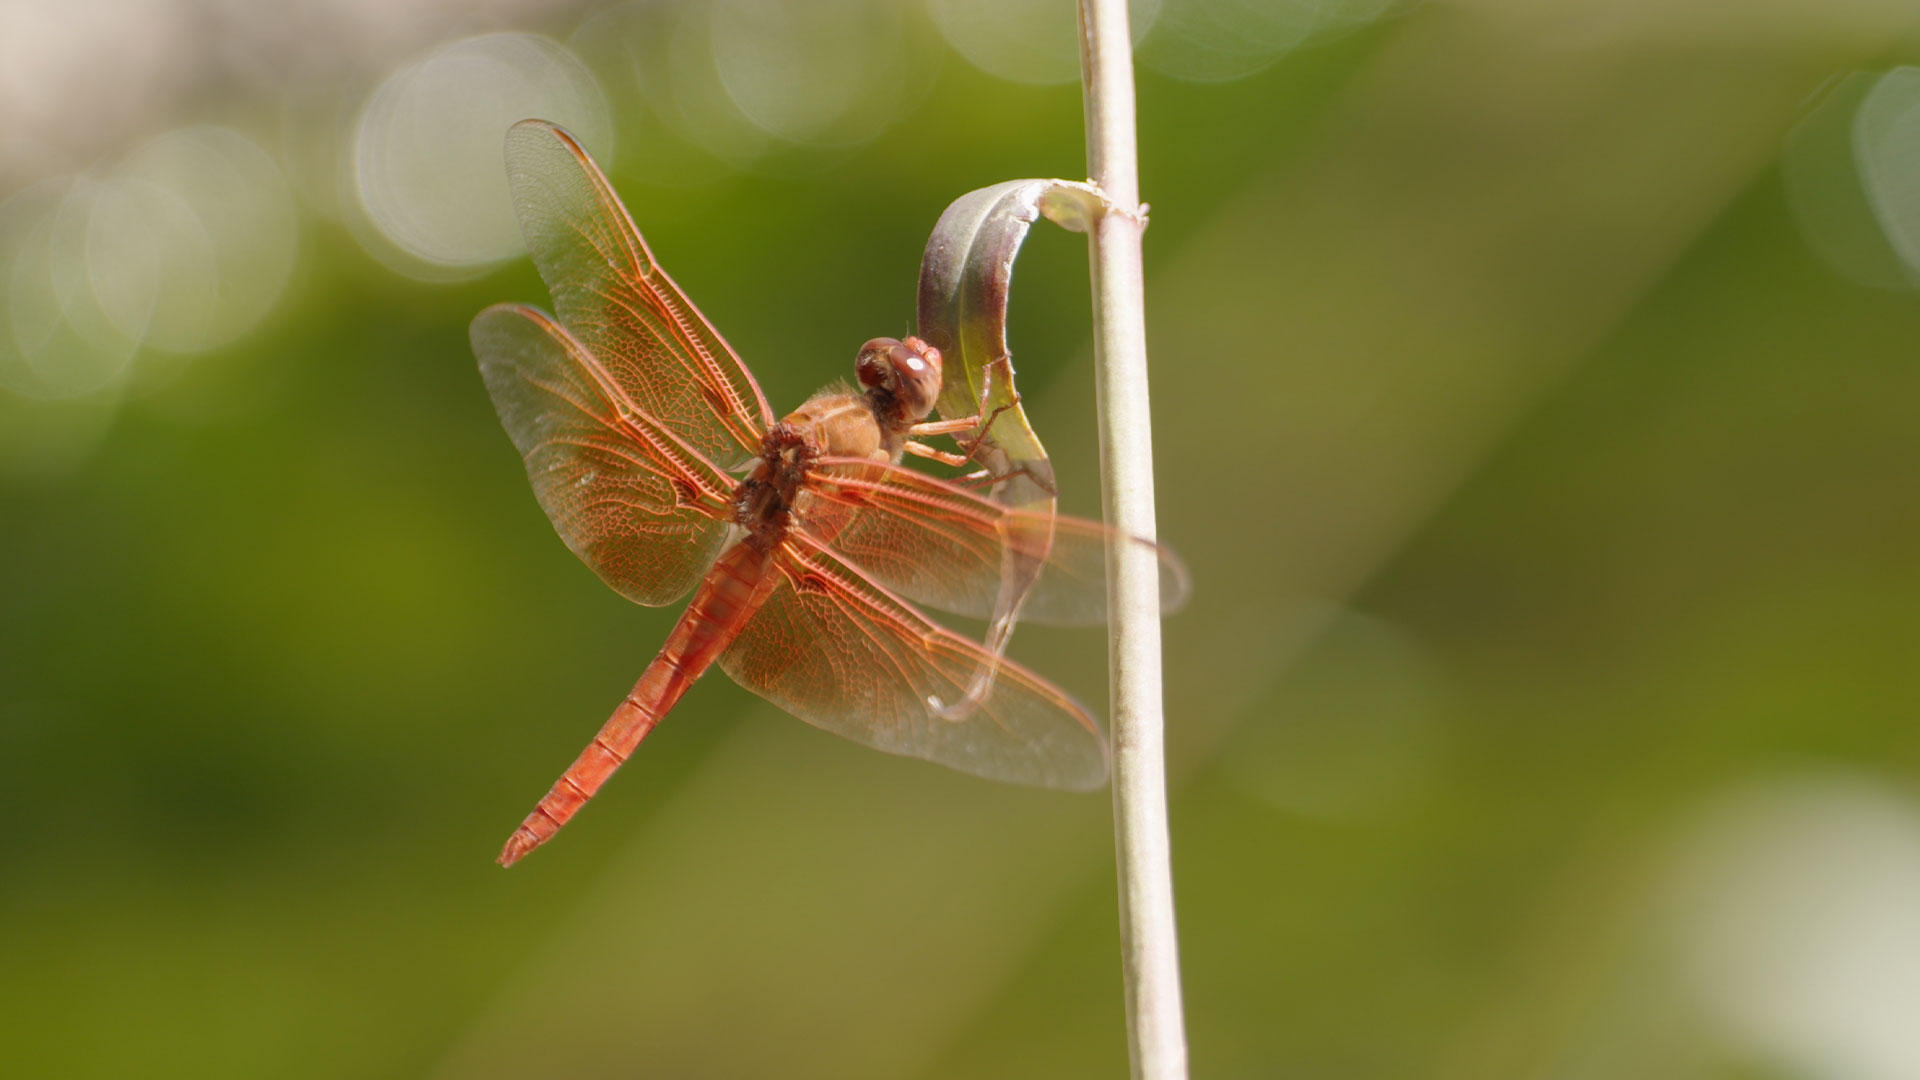 Dragonflies have been around for 300 million years and are one of the first insects to inhabit this planet. They are extraordinary in many ways including hunting ability, reproductive cycle and lifespan. 